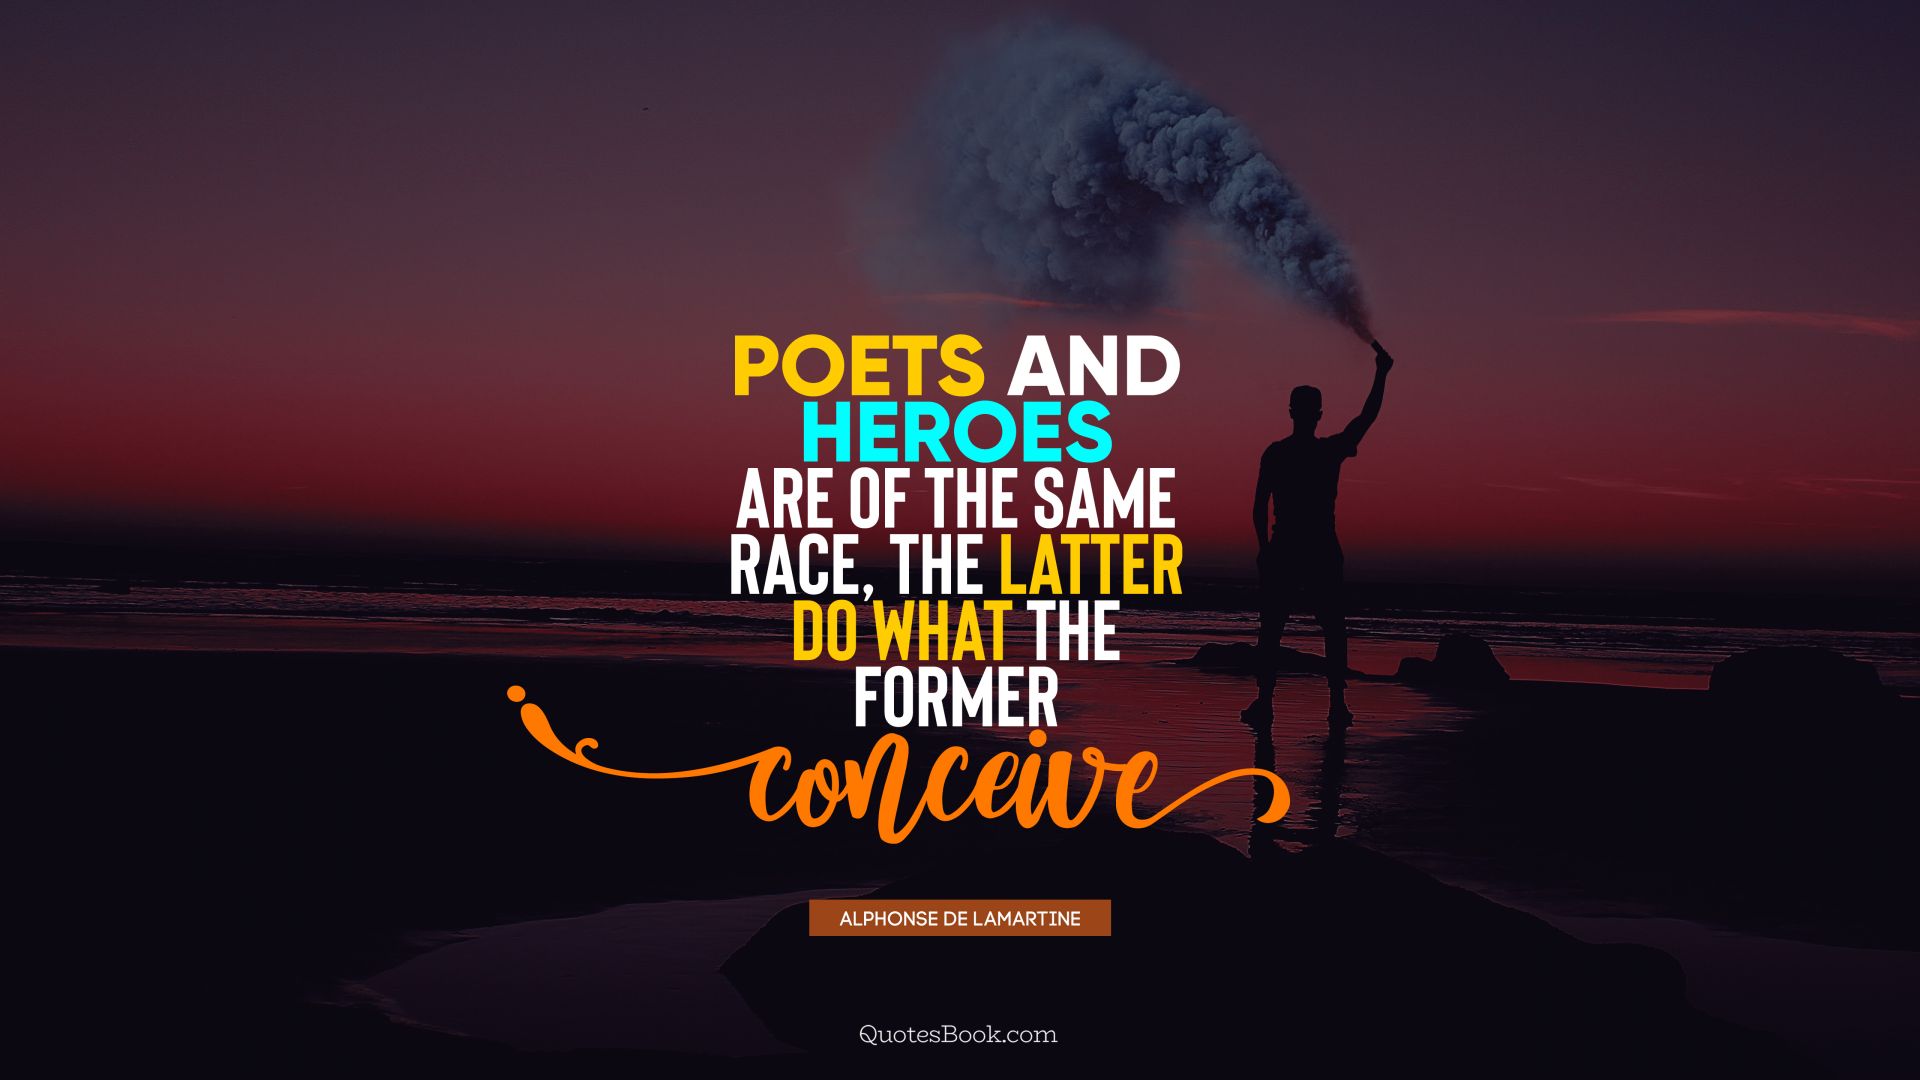 Poets and heroes are of the same race, the latter do what the former conceive. - Quote by Alphonse de Lamartine